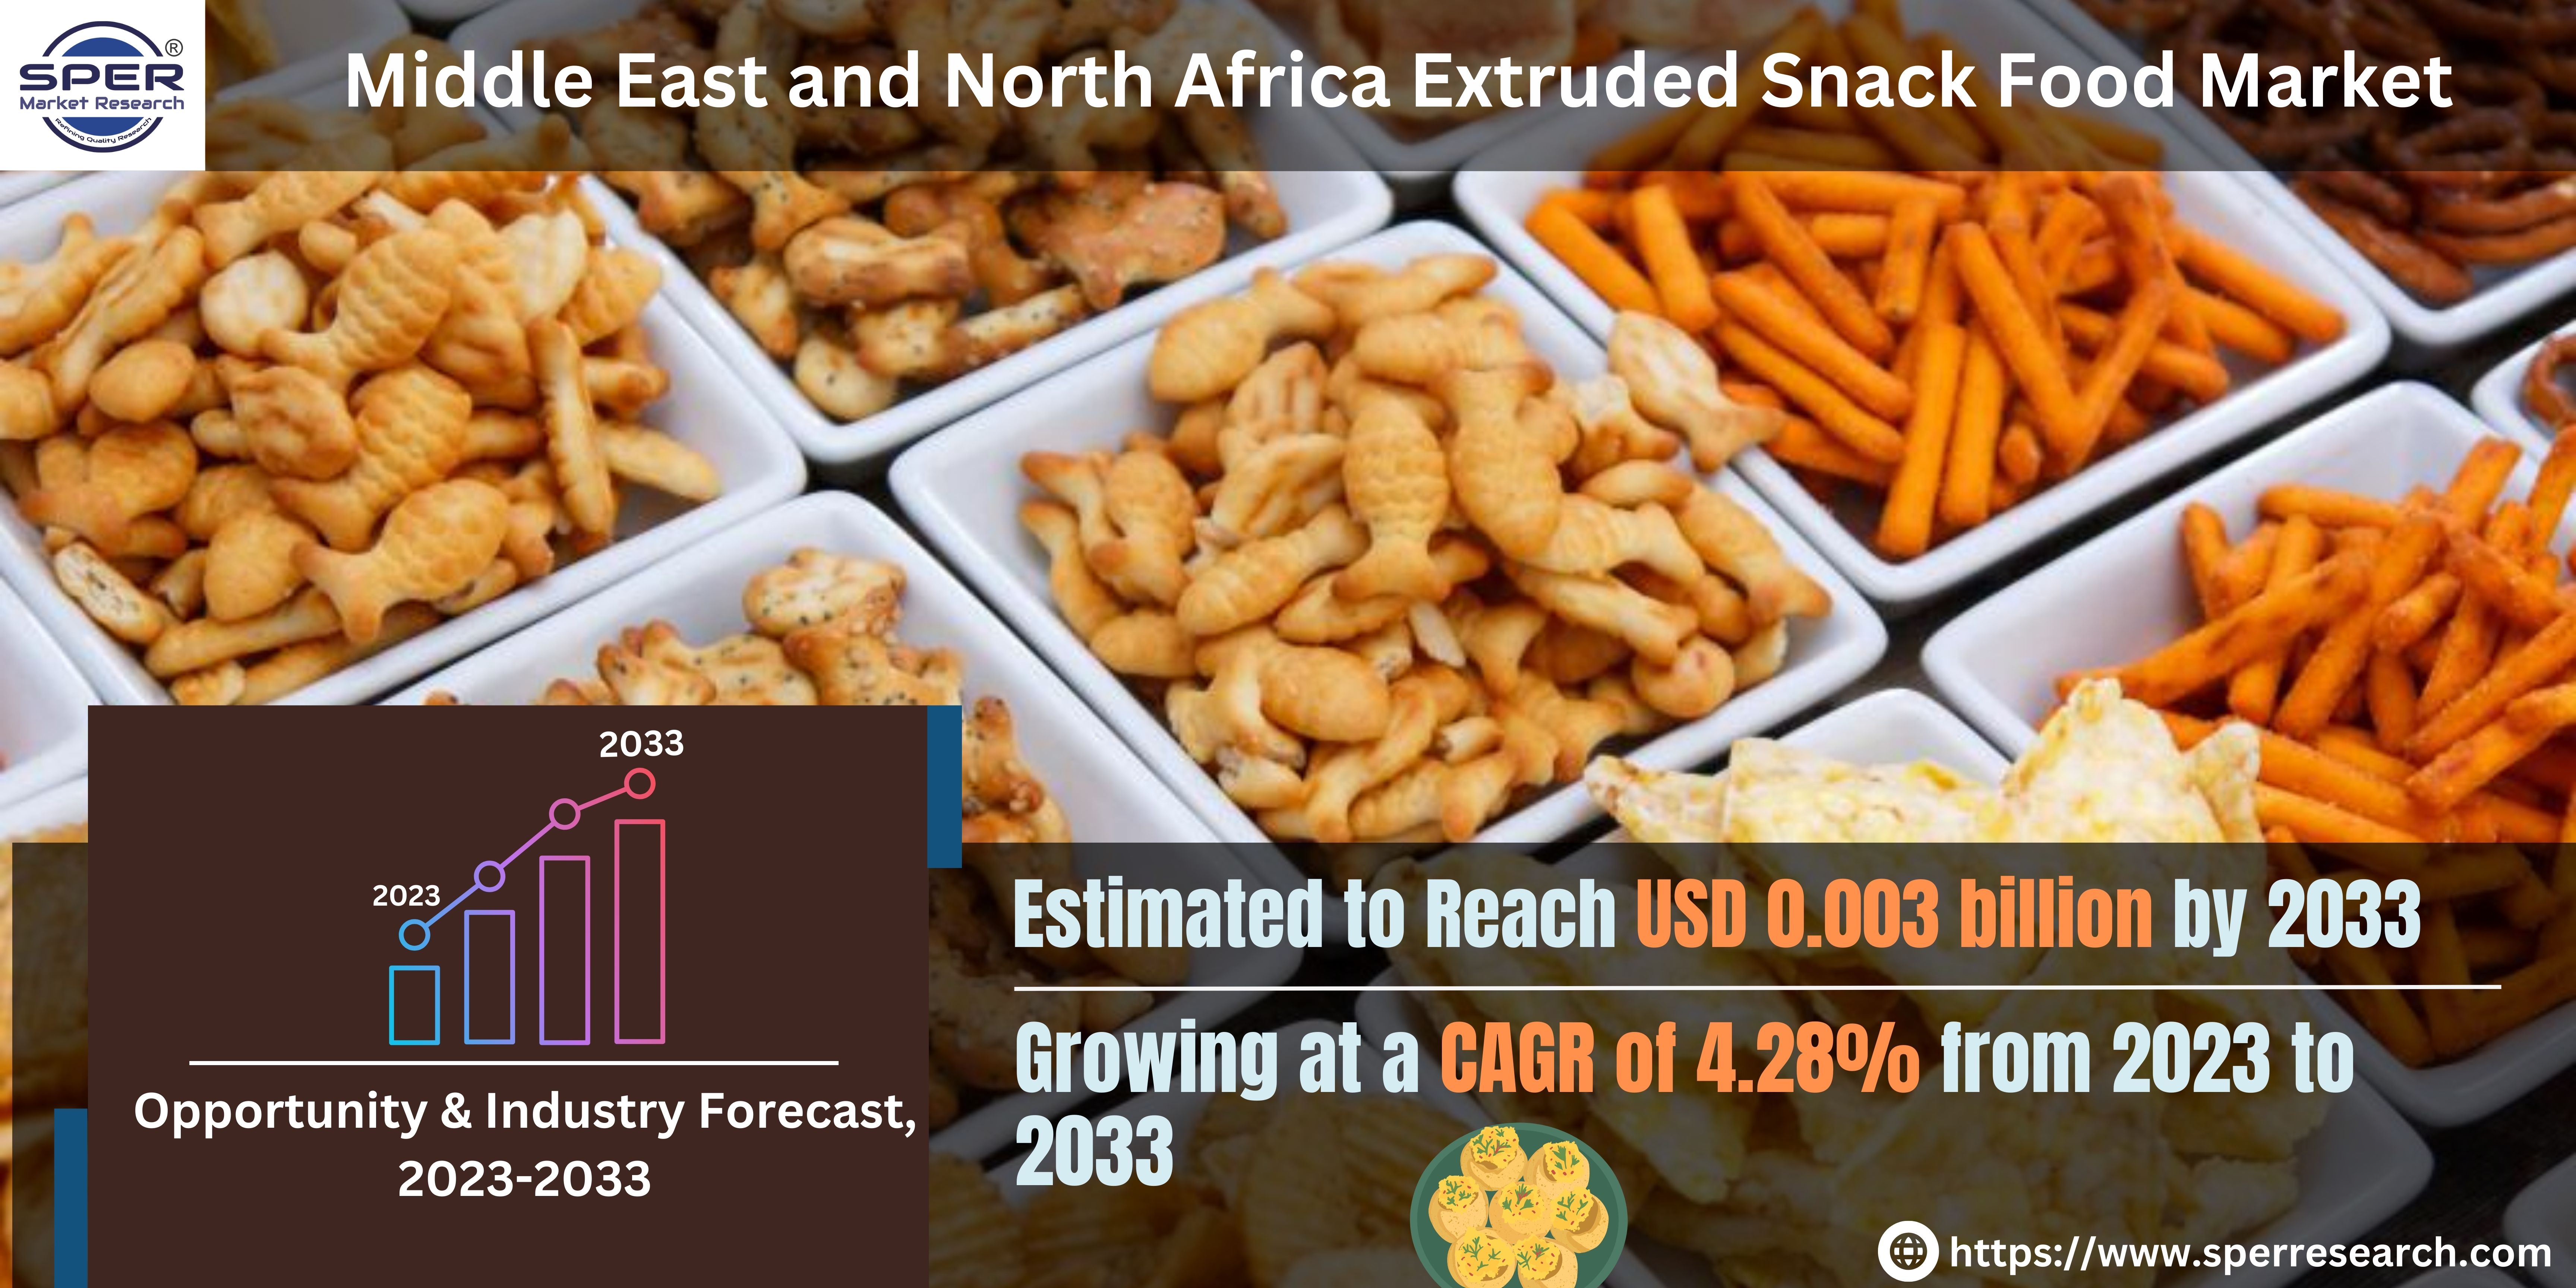 Middle East and North Africa Extruded Snack Food Market